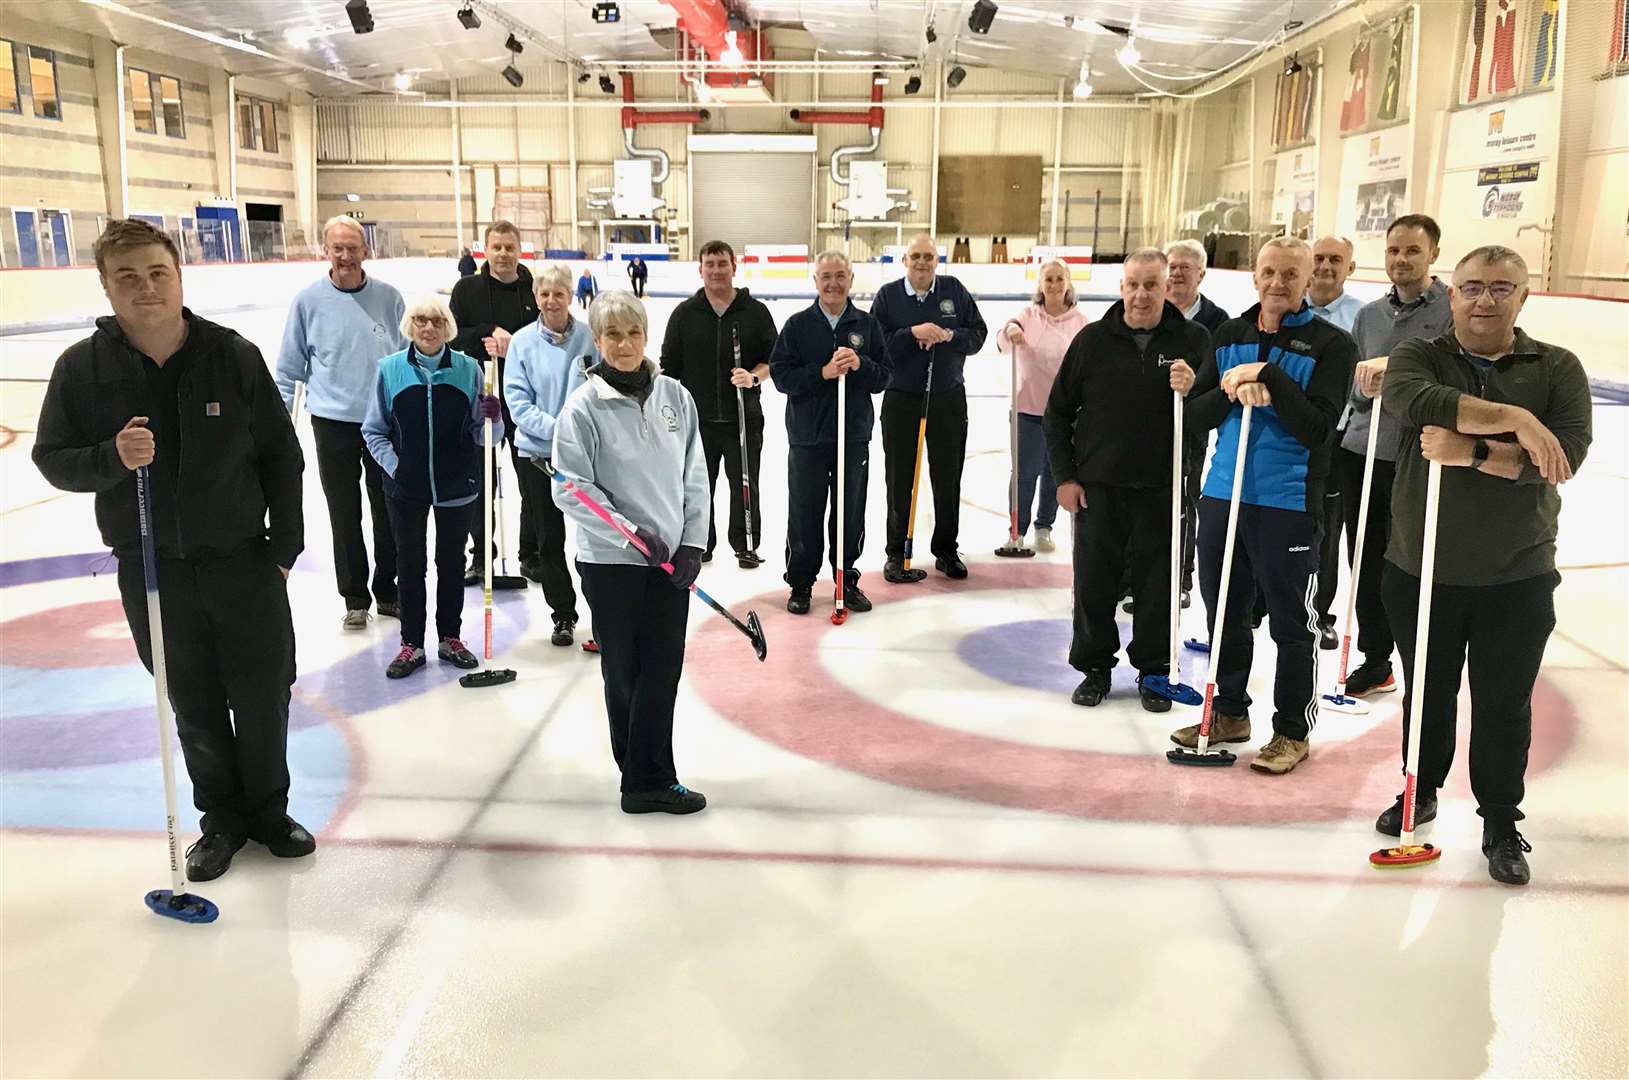 The Forres bonspiel particpiants, including the winning Forres quartet of Charlie Watt Jnr (fourth from left), Graeme Govan (second from left), Carol Bennett (sixth from left) and Julie Stewart (tenth from left).